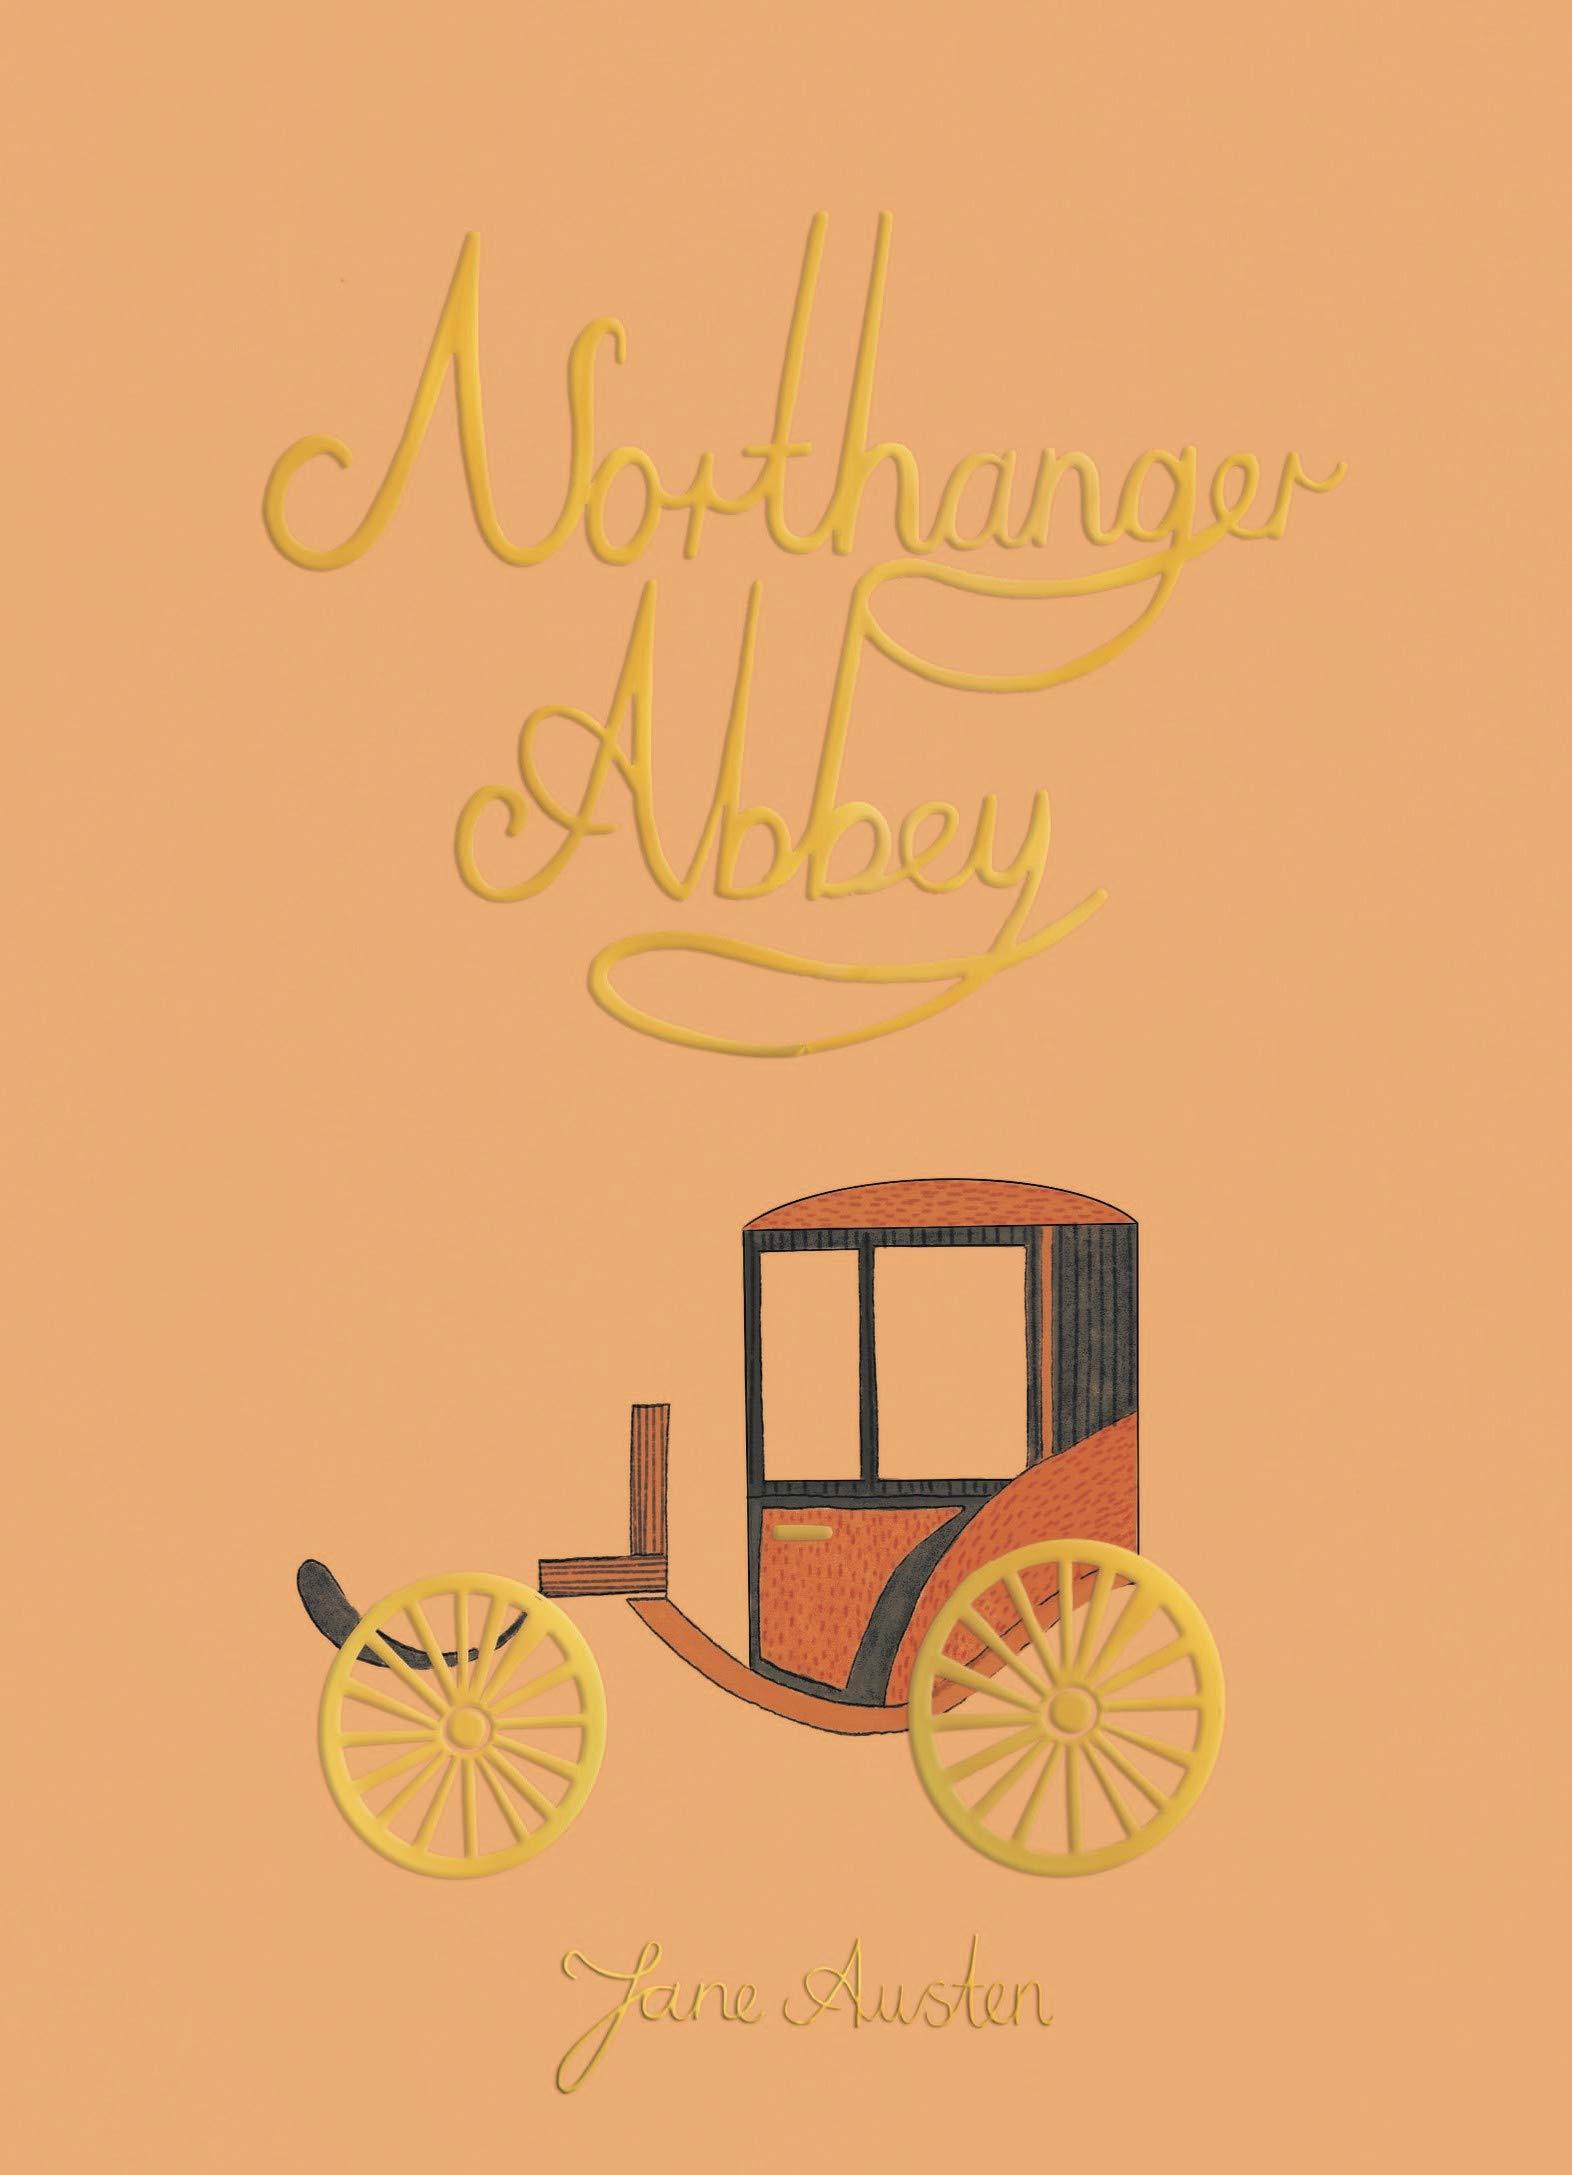 Northanger Abbey CE